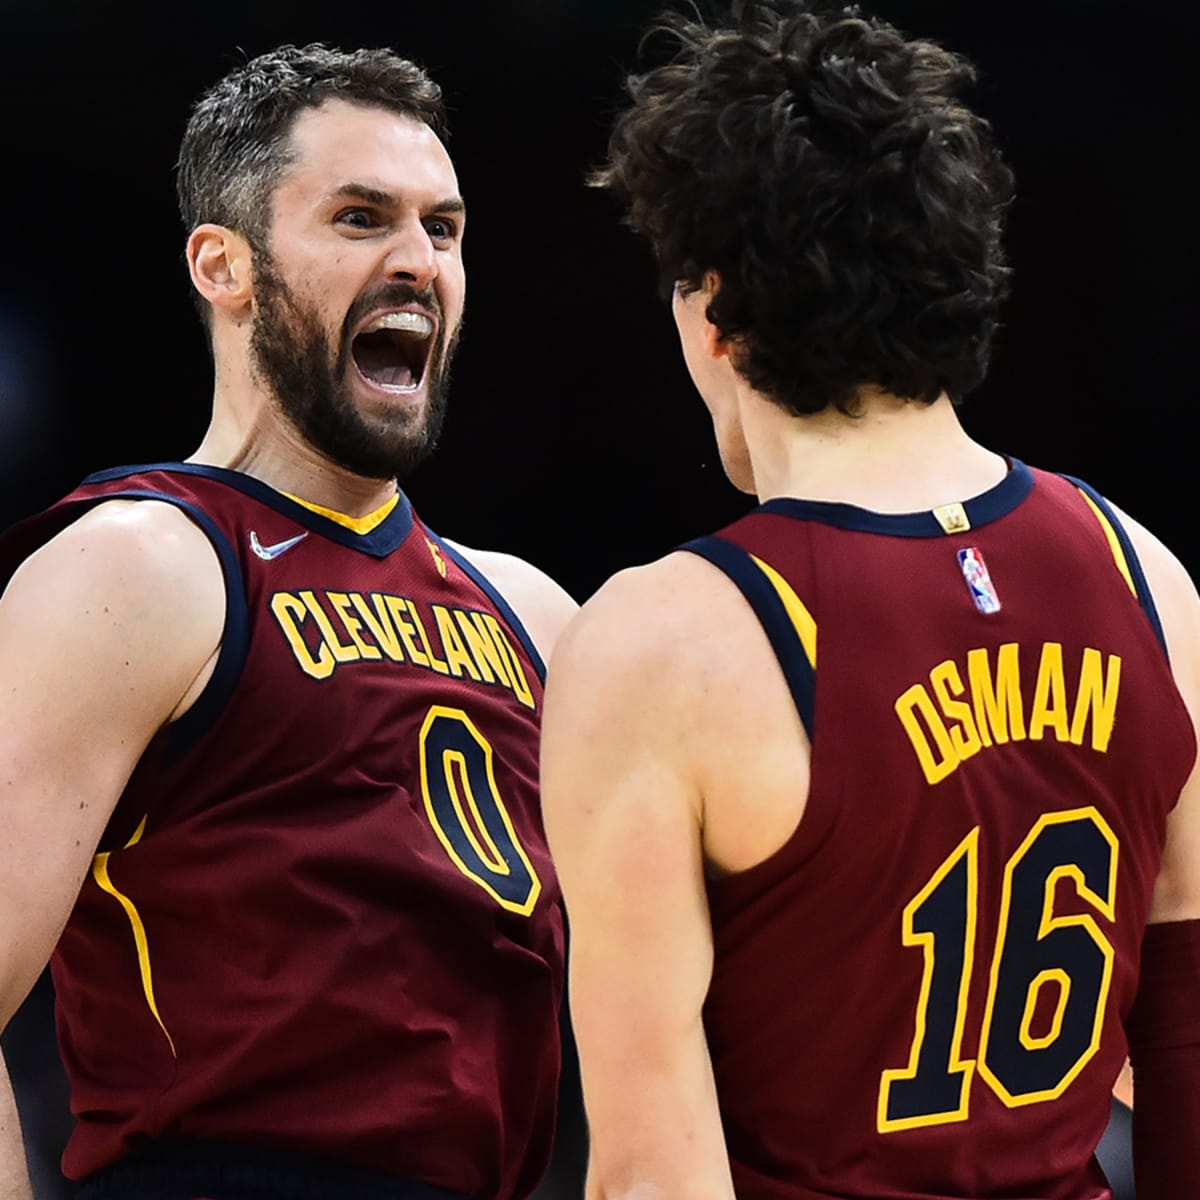 Kevin Love leaves the Cavaliers for the Miami Heat